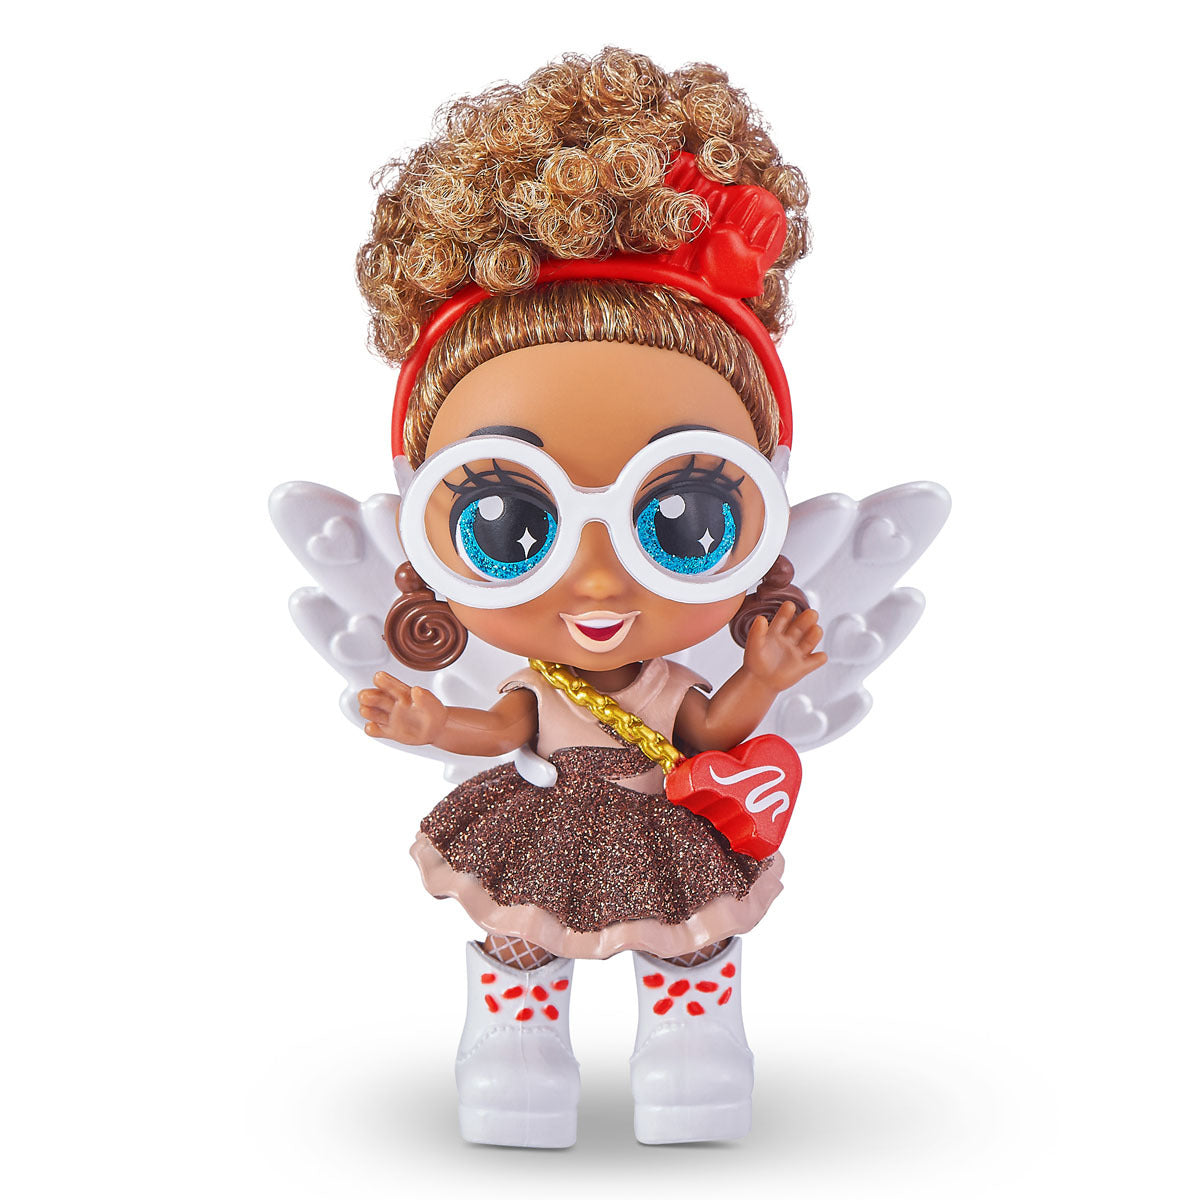 Itty Bitty Prettys Angel High Capsule Doll By Zuru Styles Vary One The Entertainer Pakistan 